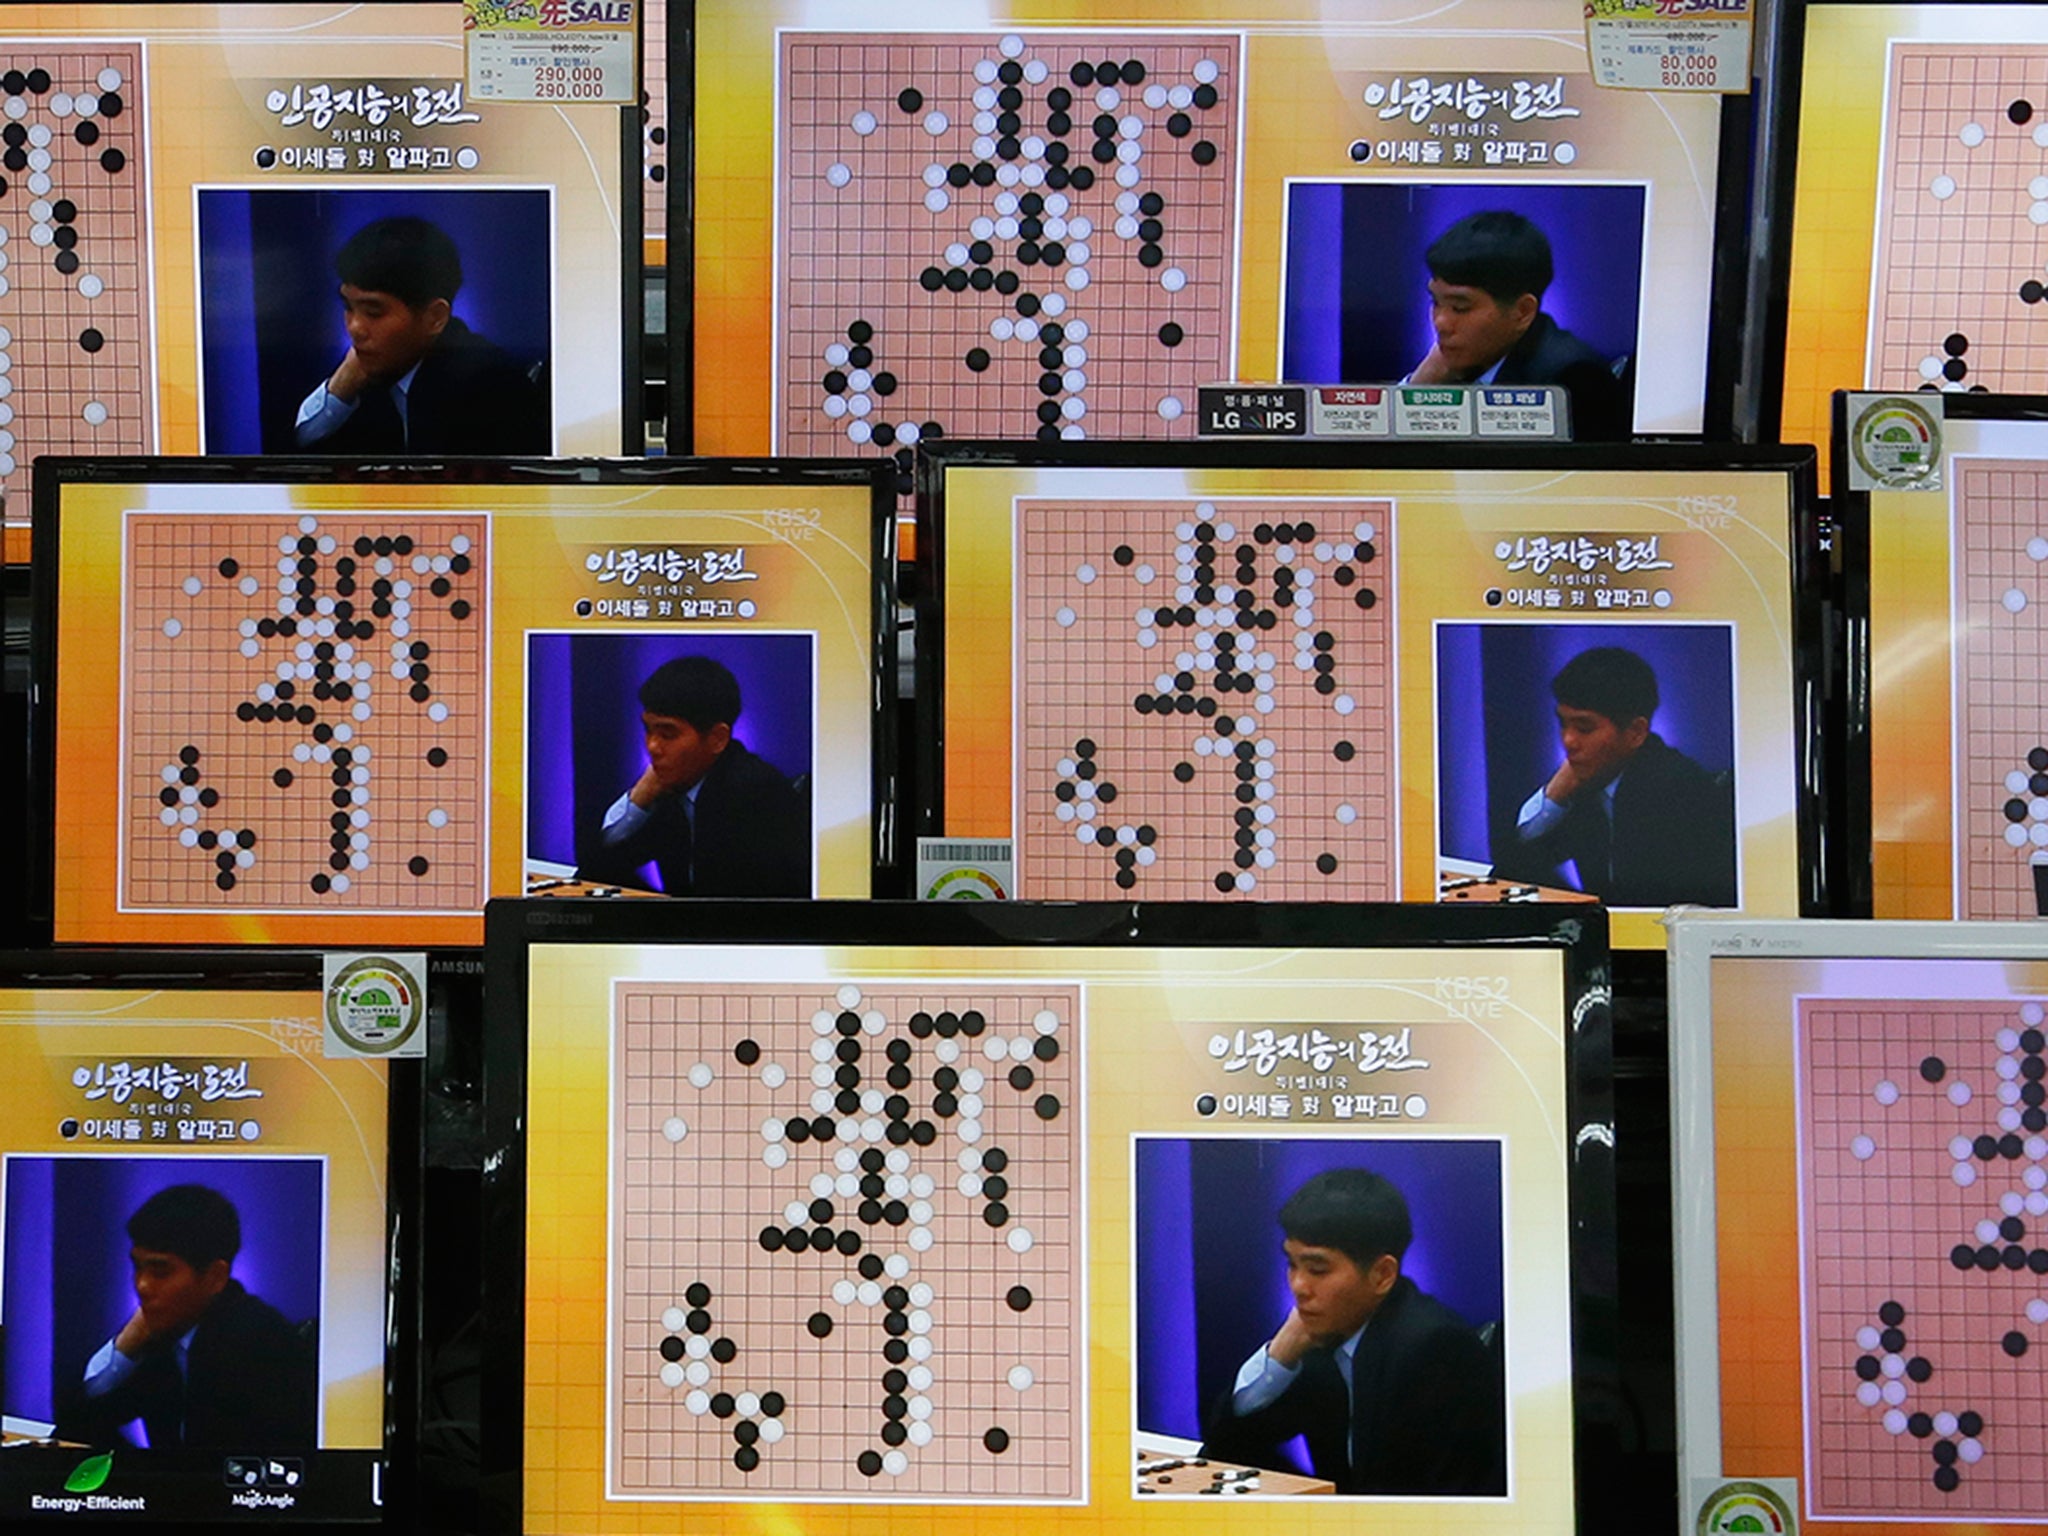 South Korean professional Go player Lee Sedol is seen on TV screens during the Google DeepMind Challenge Match against Google's artificial intelligence program, AlphaGo, at the Yongsan Electronic store in Seoul, South Korea